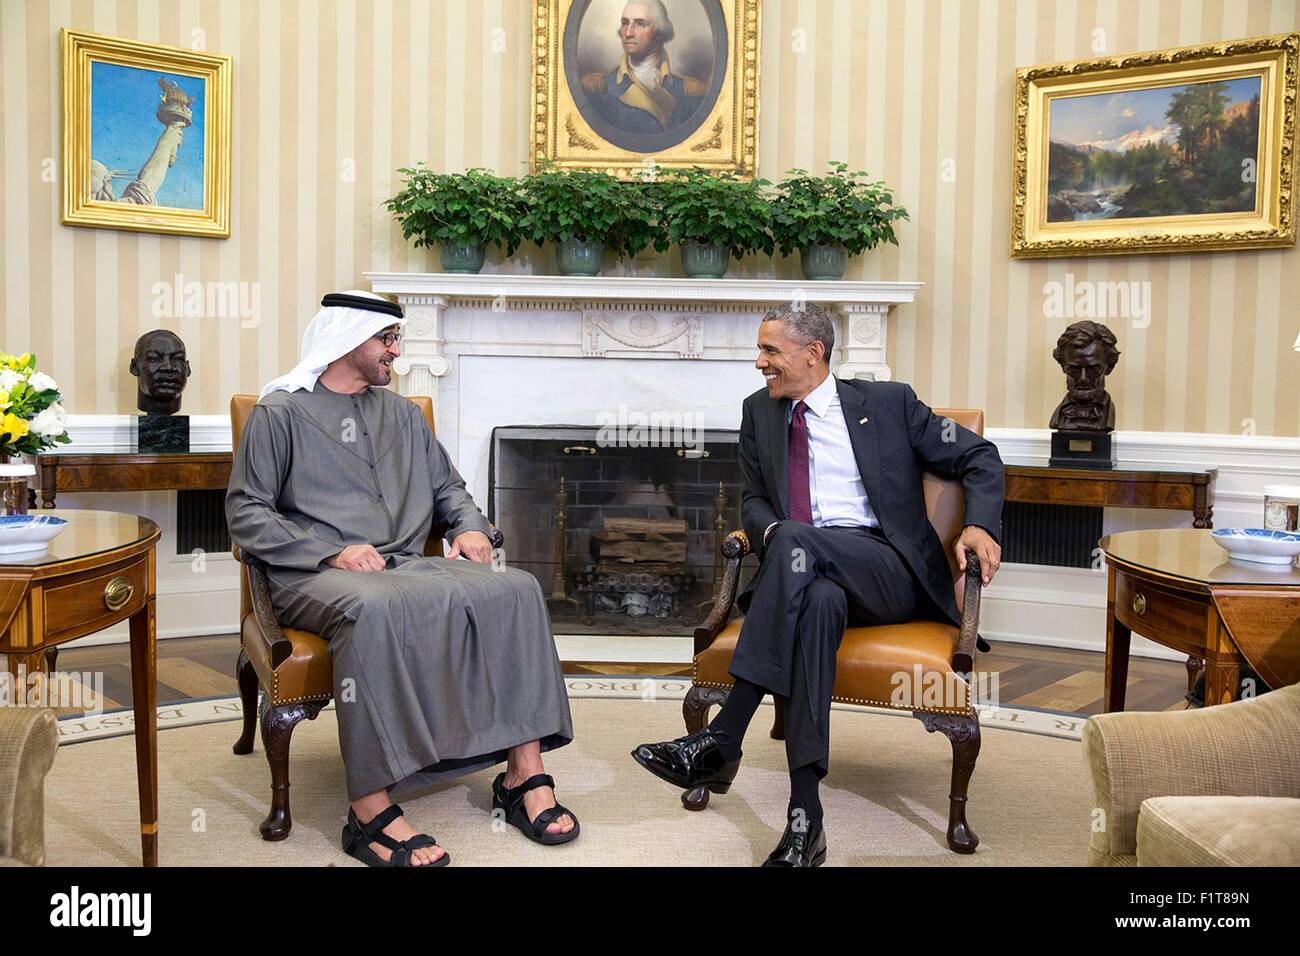 U.S. President Barack Obama meets with Crown Prince Mohammed Bin Zayed Al Nahyan of the United Arab Emirates in the Oval Office of the White House April 20, 2015 in Washington, DC. Stock Photo